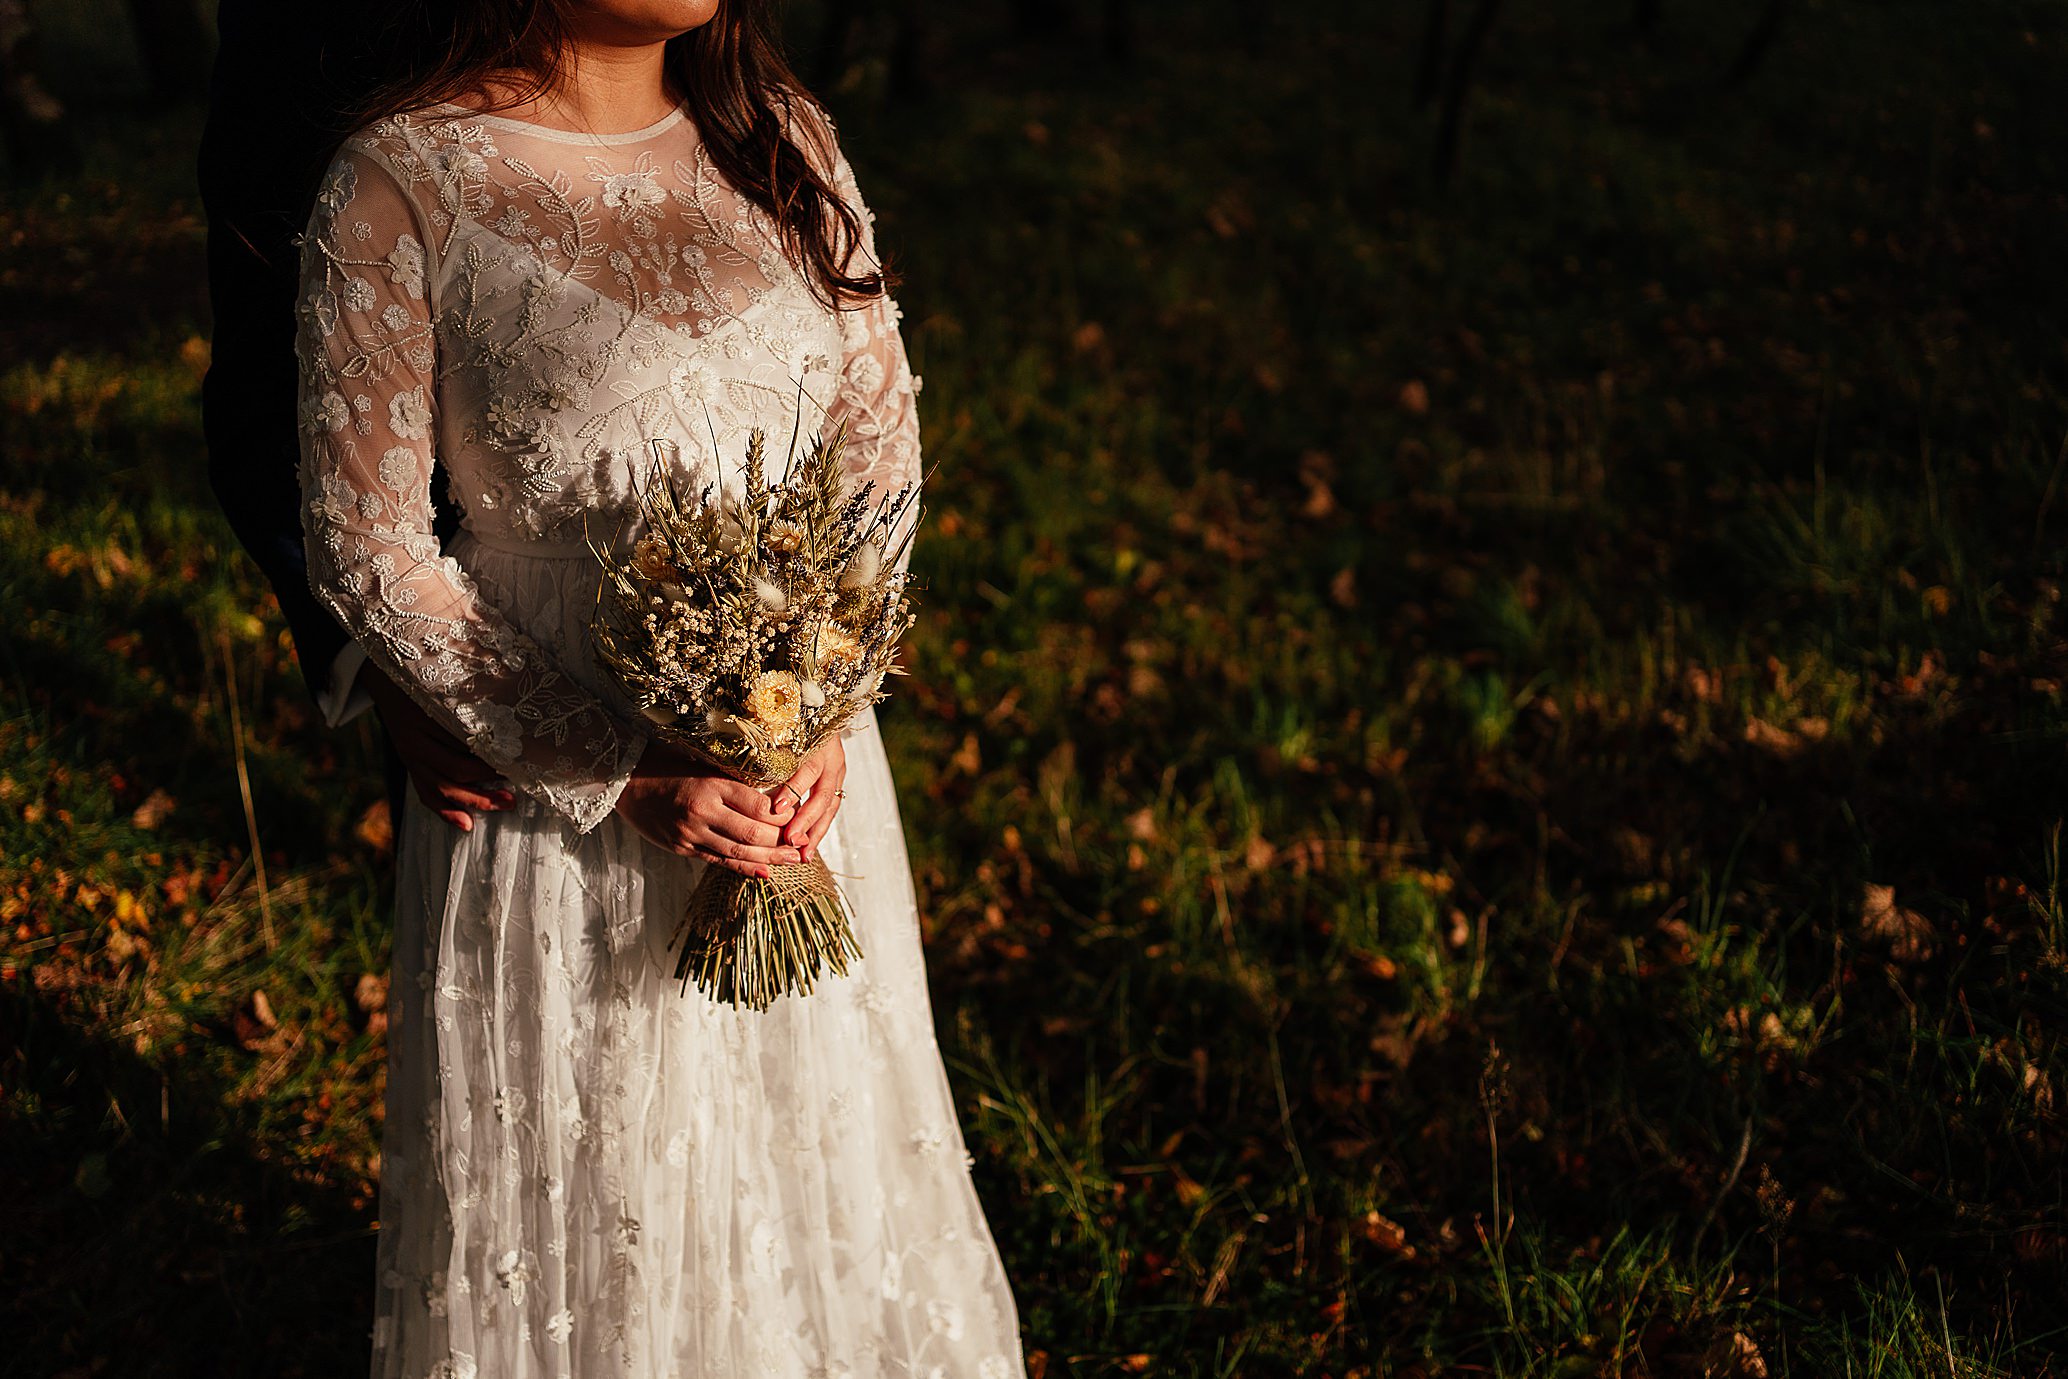 warm light from the sun shining on bride in beautiful white dress holding bridal bouquet with dark shadows over grass in background monachyle mhor wedding photoshoot fotomaki photography